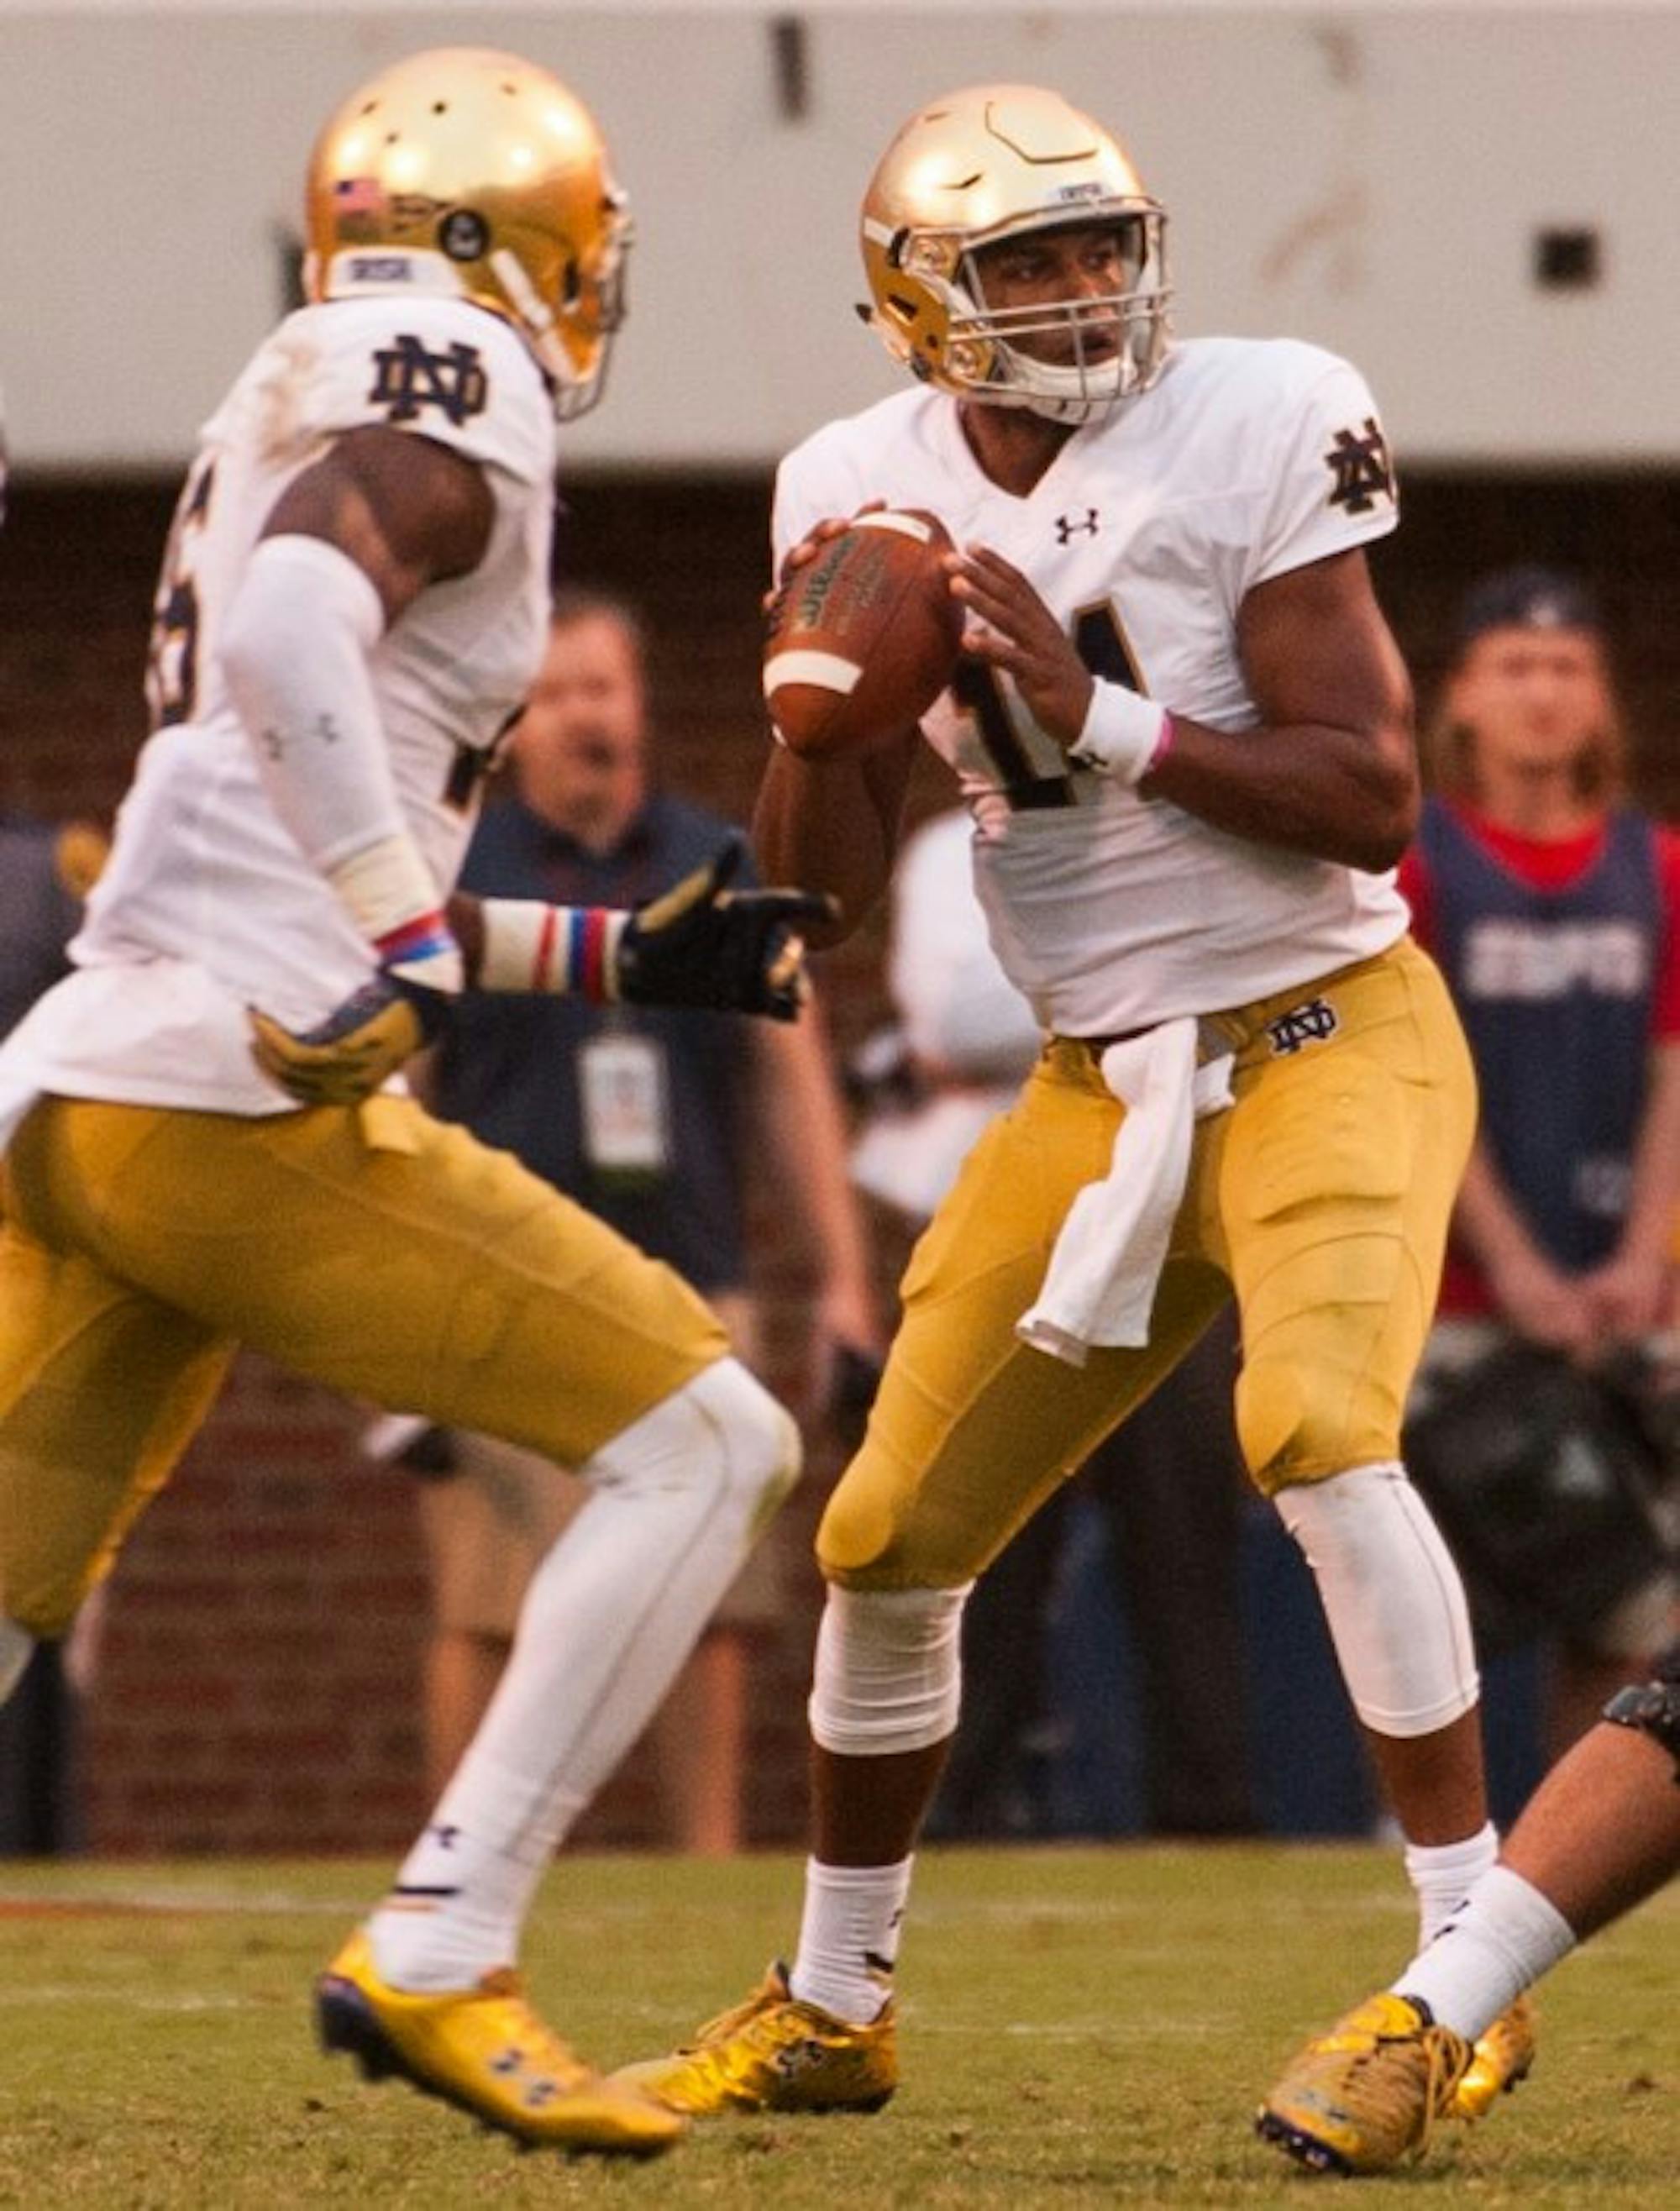 Sophomore quarterback DeShone Kizer drops back for a pass in Notre Dame’s dramatic come from behind victory over Virginia on Saturday. He will take over as the starter this weekend against Georgia Tech.